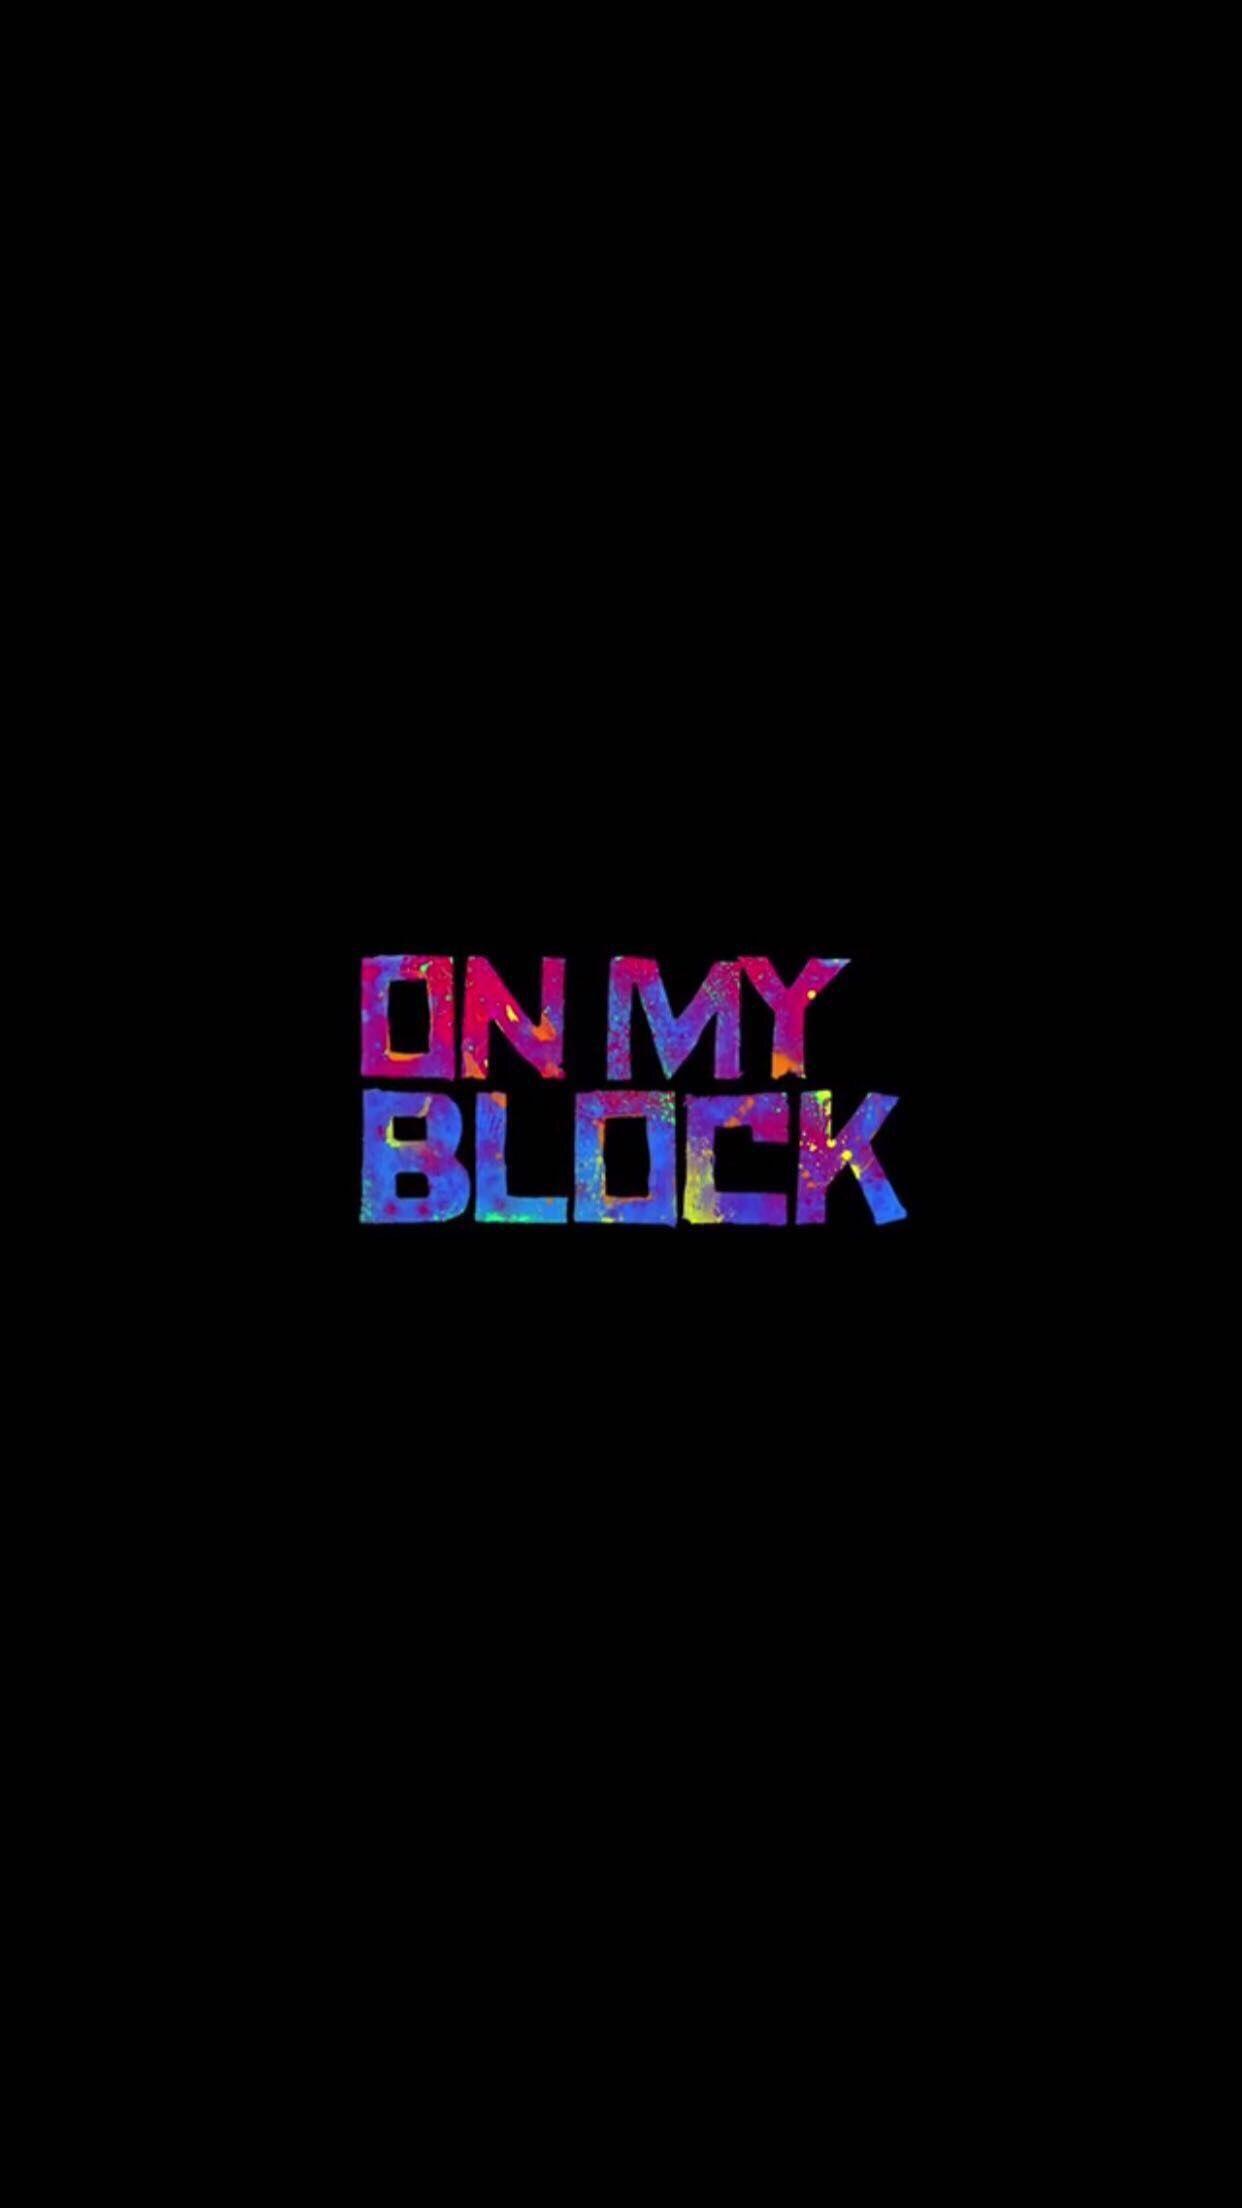 Download Get hooked on On My Block  the comingofage comedy streaming on  Netflix Wallpaper  Wallpaperscom